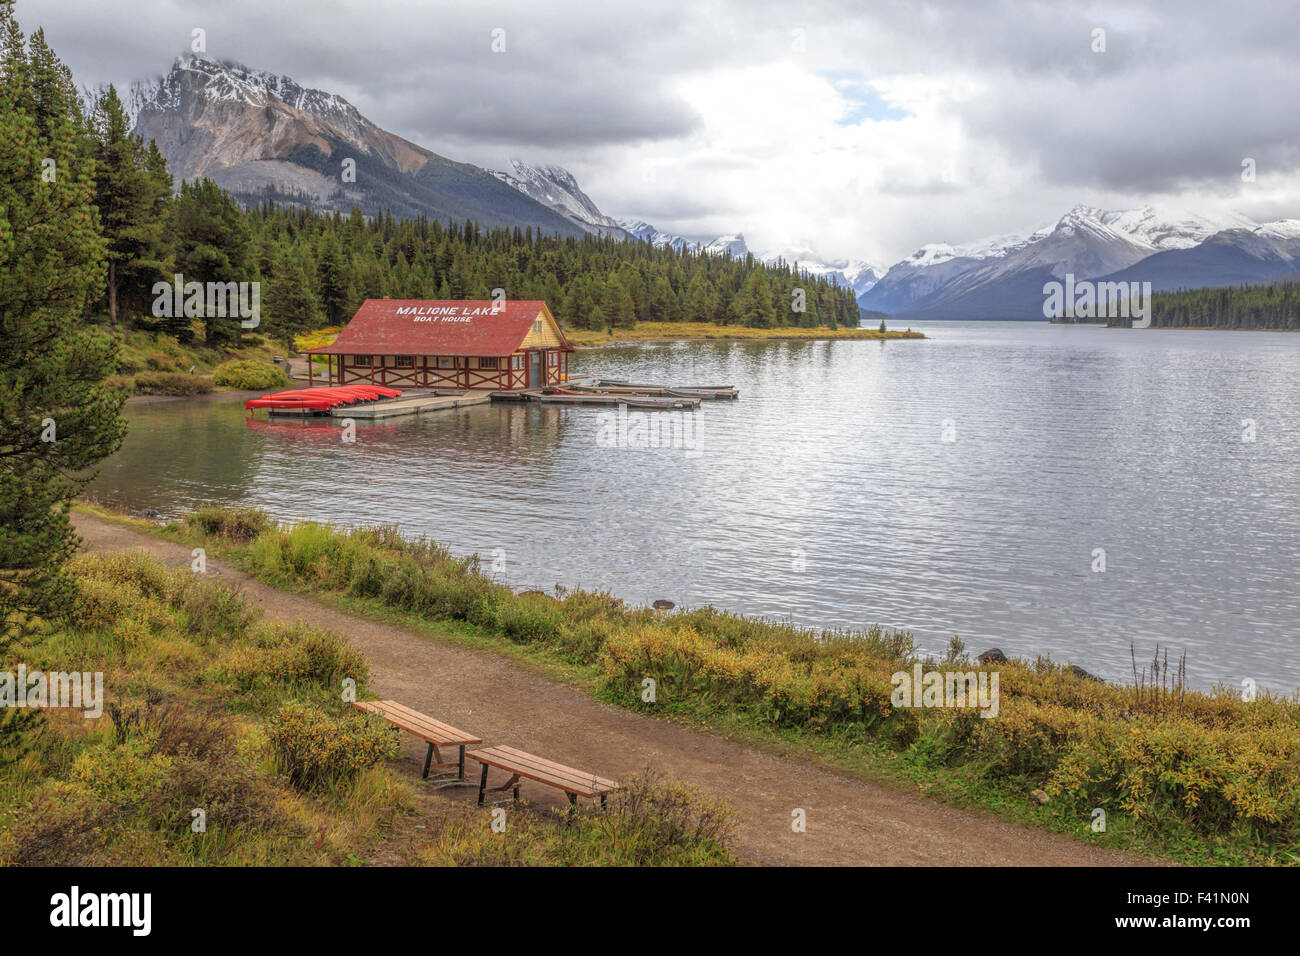 View on Maligne Lake and the boathouse with its red roof in Jasper National Park, Rocky Mountains, Alberta, Canada. Stock Photo